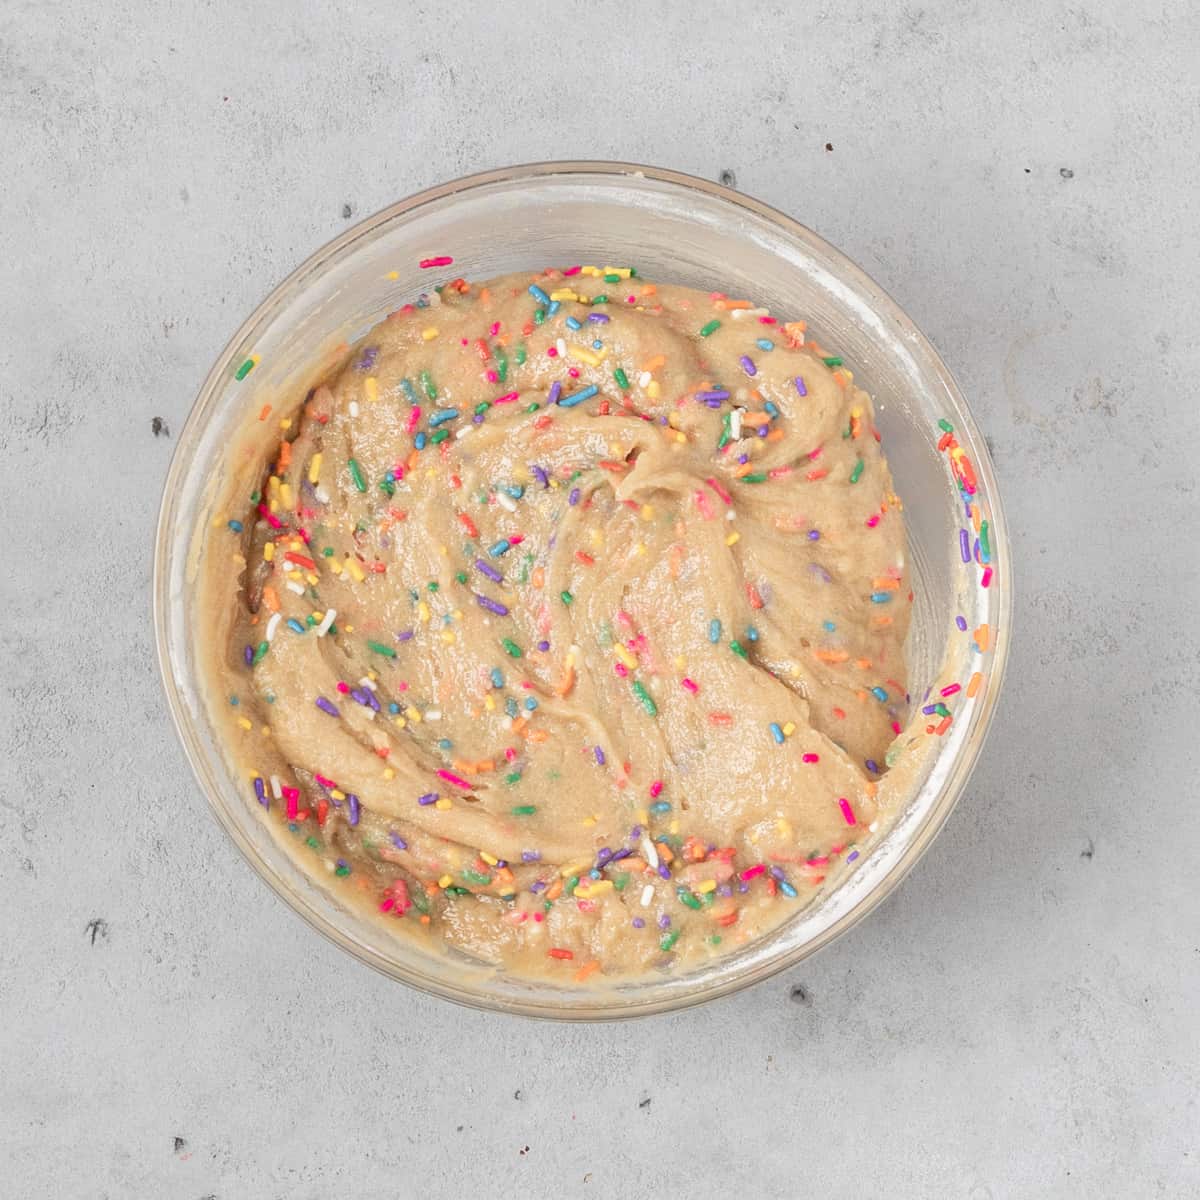 the completed blondie batter in a glass bowl on a grey background.